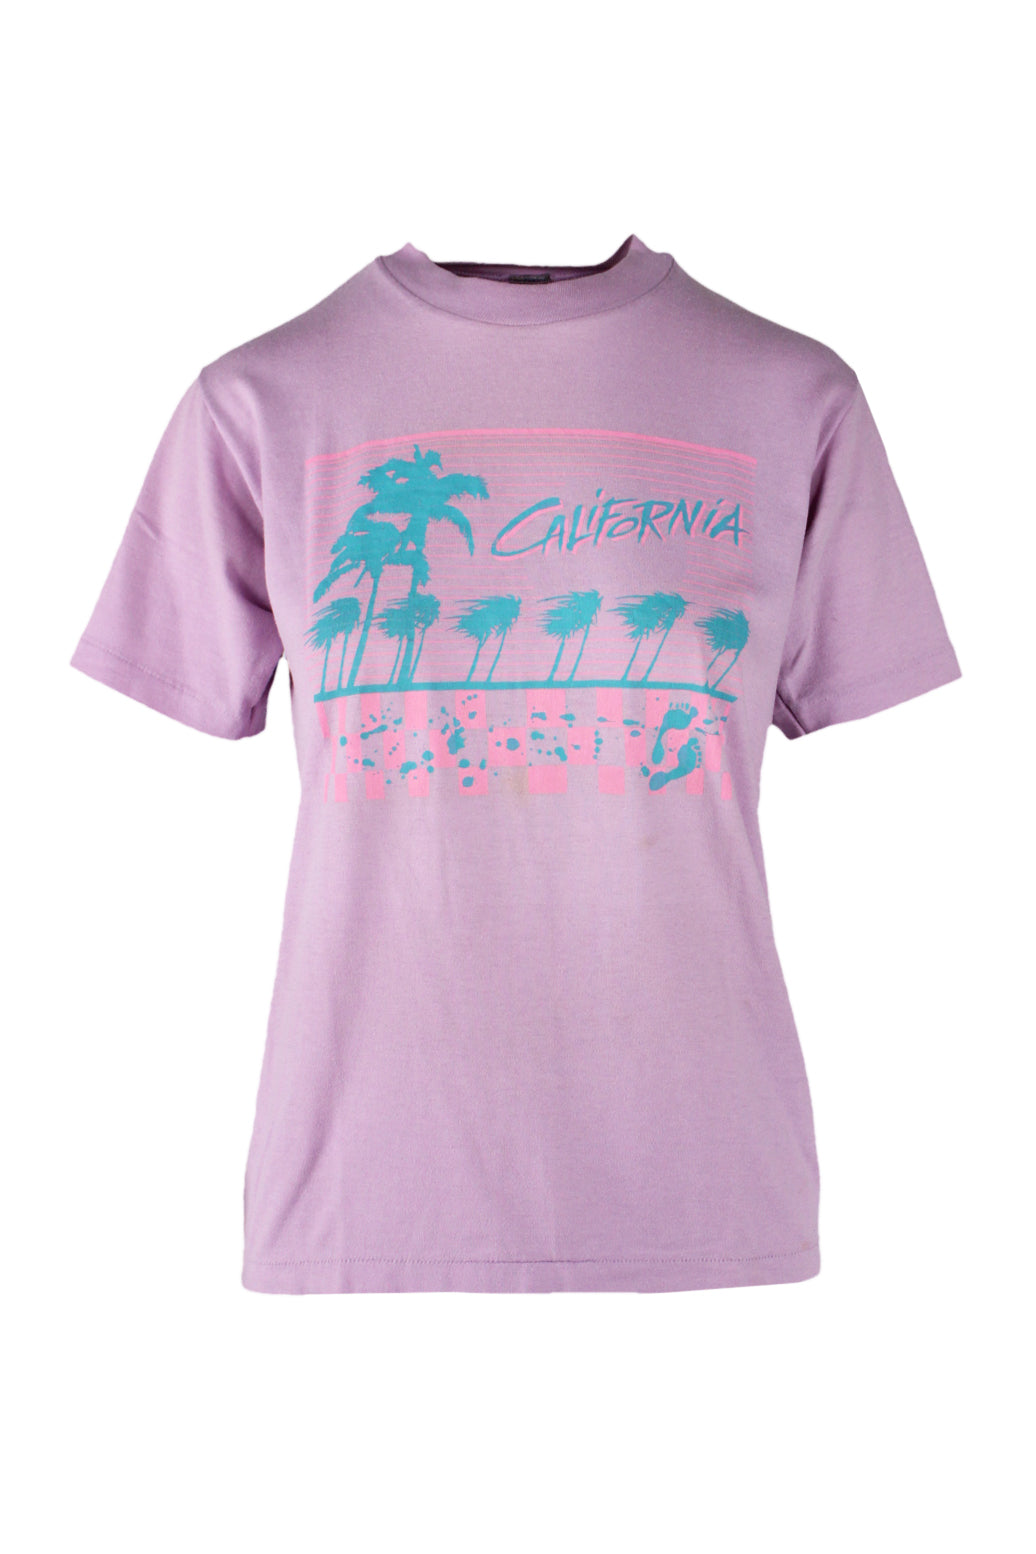 vintage lilac short sleeve t-shirt with a pink and teal graphic across the front featuring palm trees and footprints under the word ‘california’ 